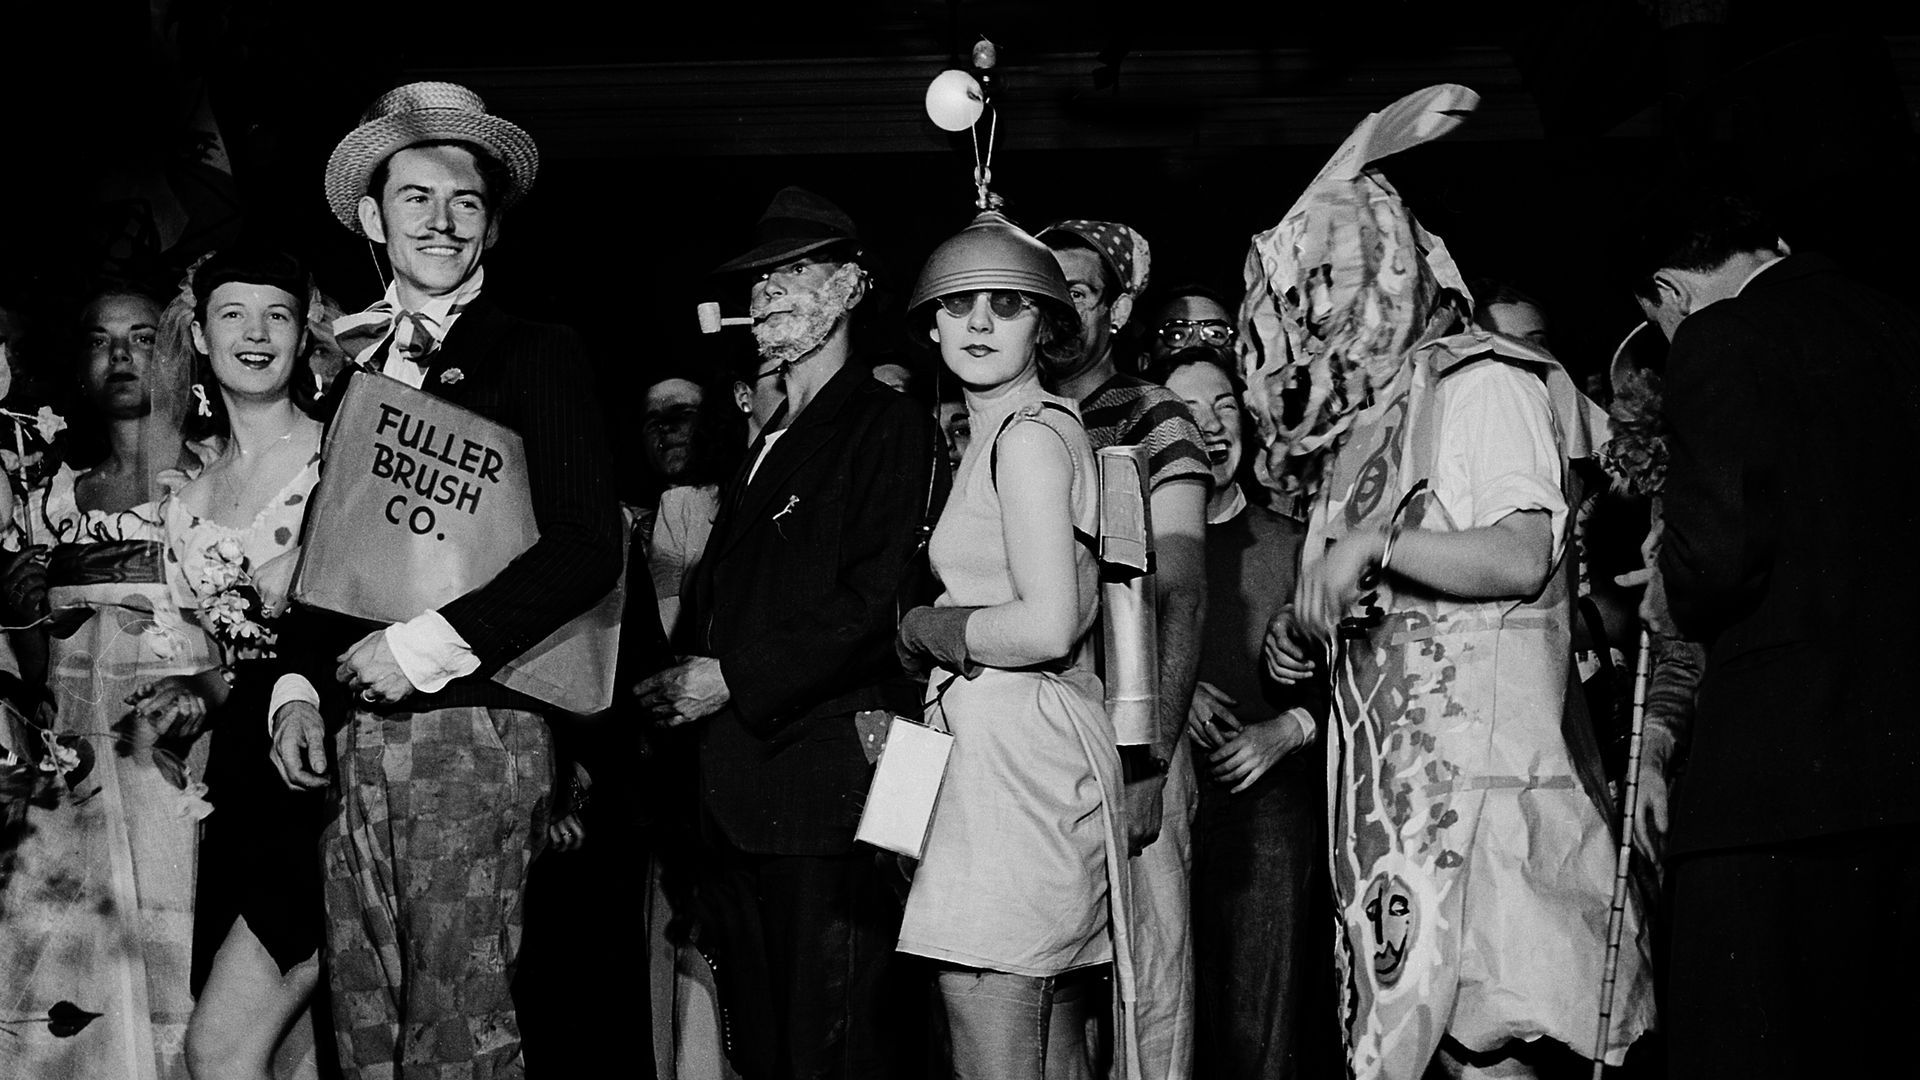 Photo of people in Halloween costumes in 1949.